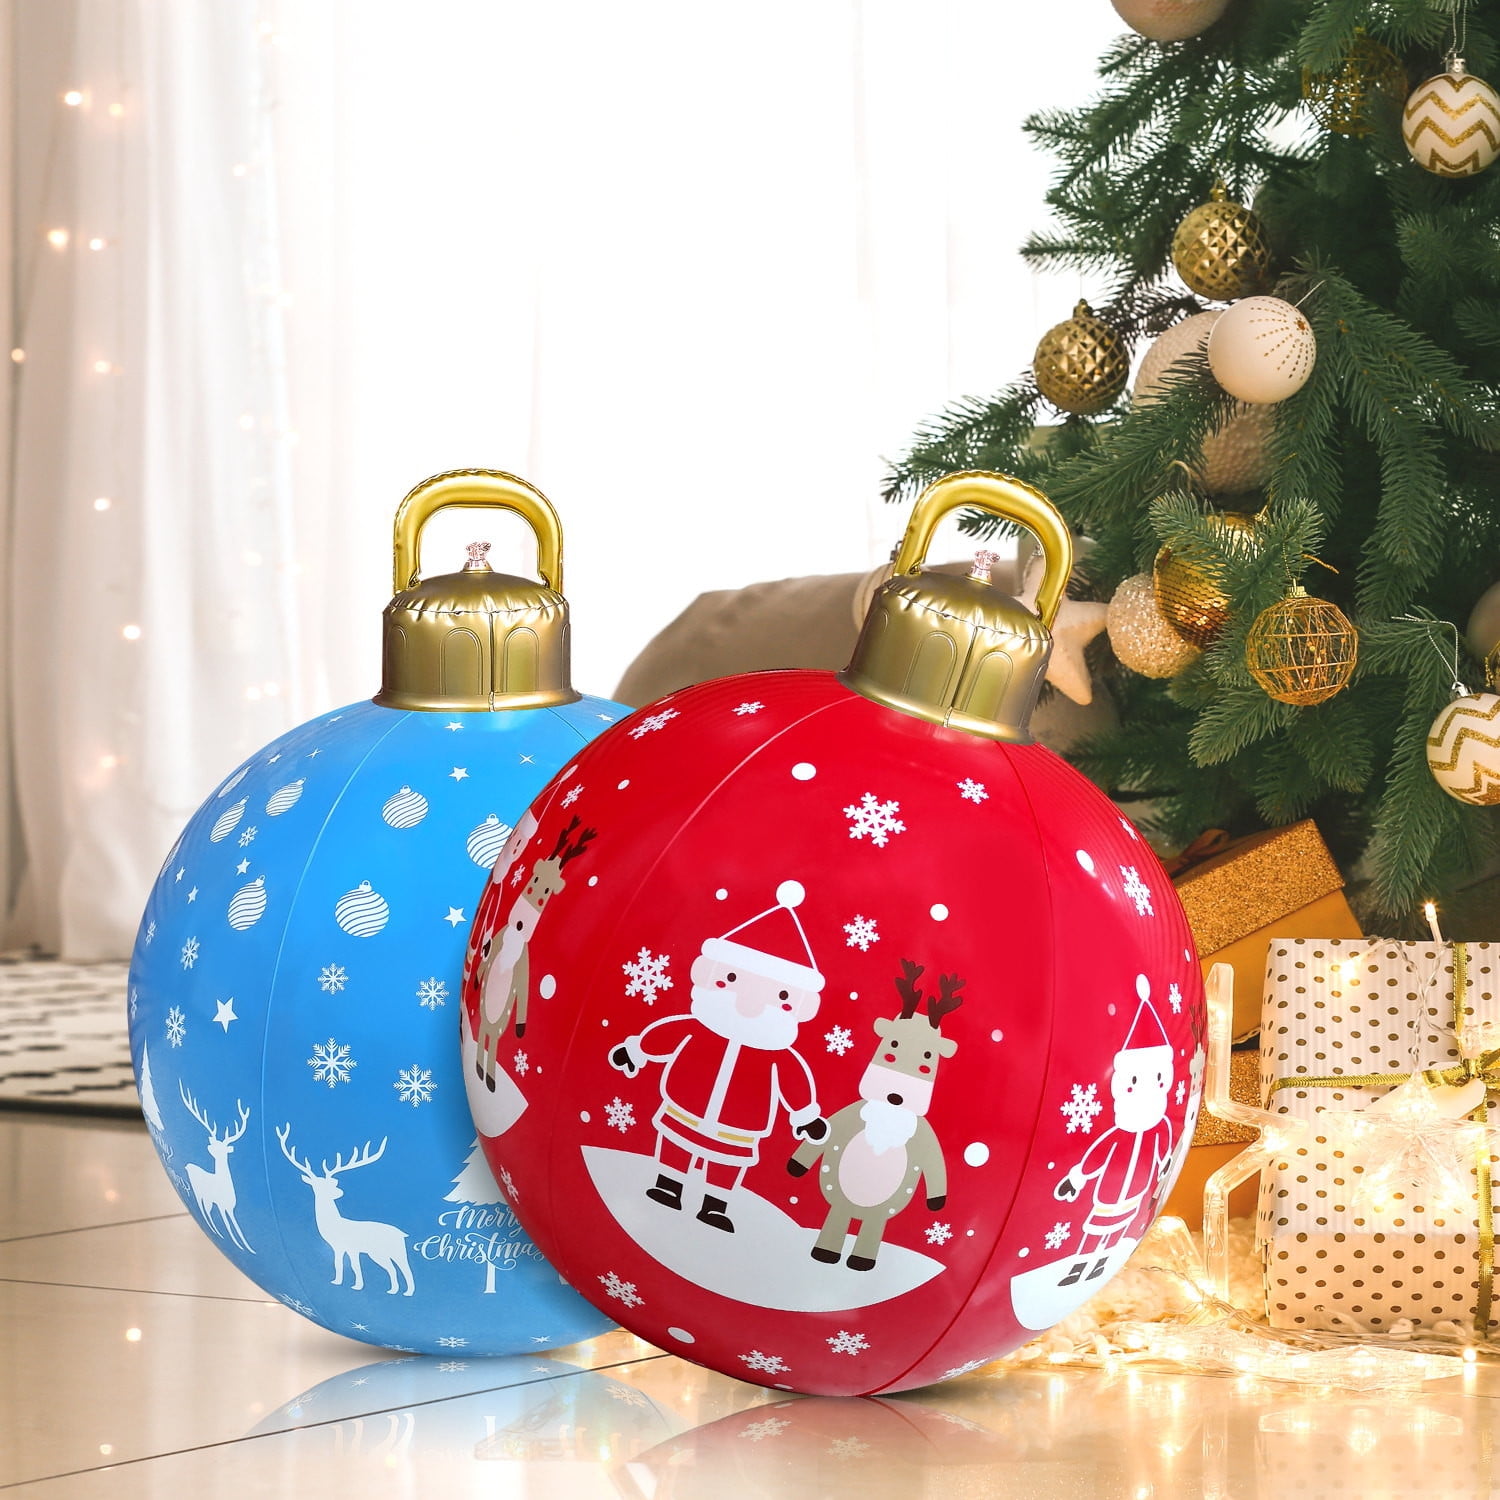 Usmixi Under 5 Dollars Inflatable Christmas Ornaments Oversized Christmas  Ball Ornaments For Xmas Yard Decorations Indoor Outdoor 